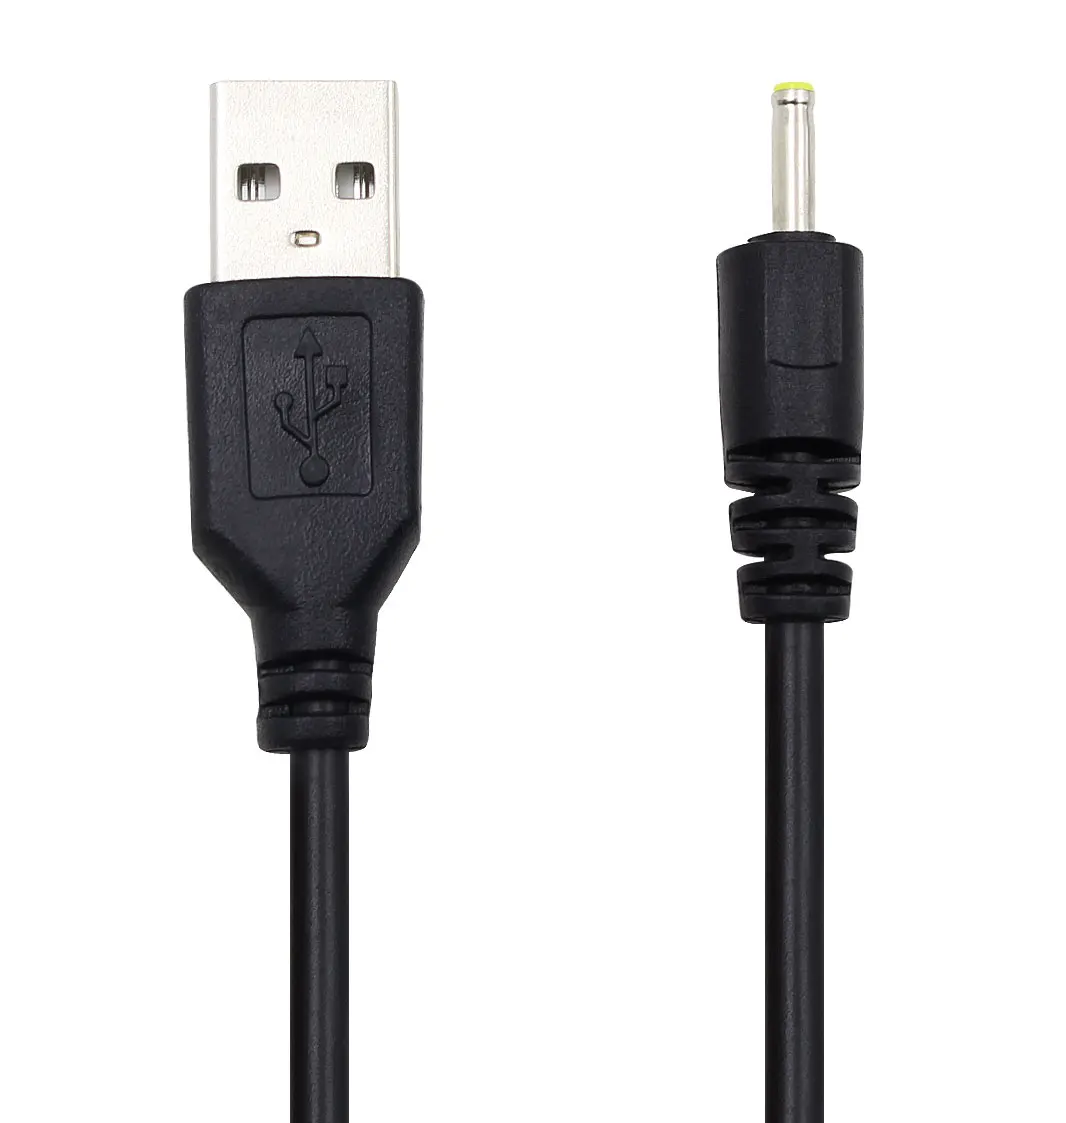 USB DC Charger Cable Cord for Visual Land VL-879-8GB-BLK​-ICS Android Tablet PC 